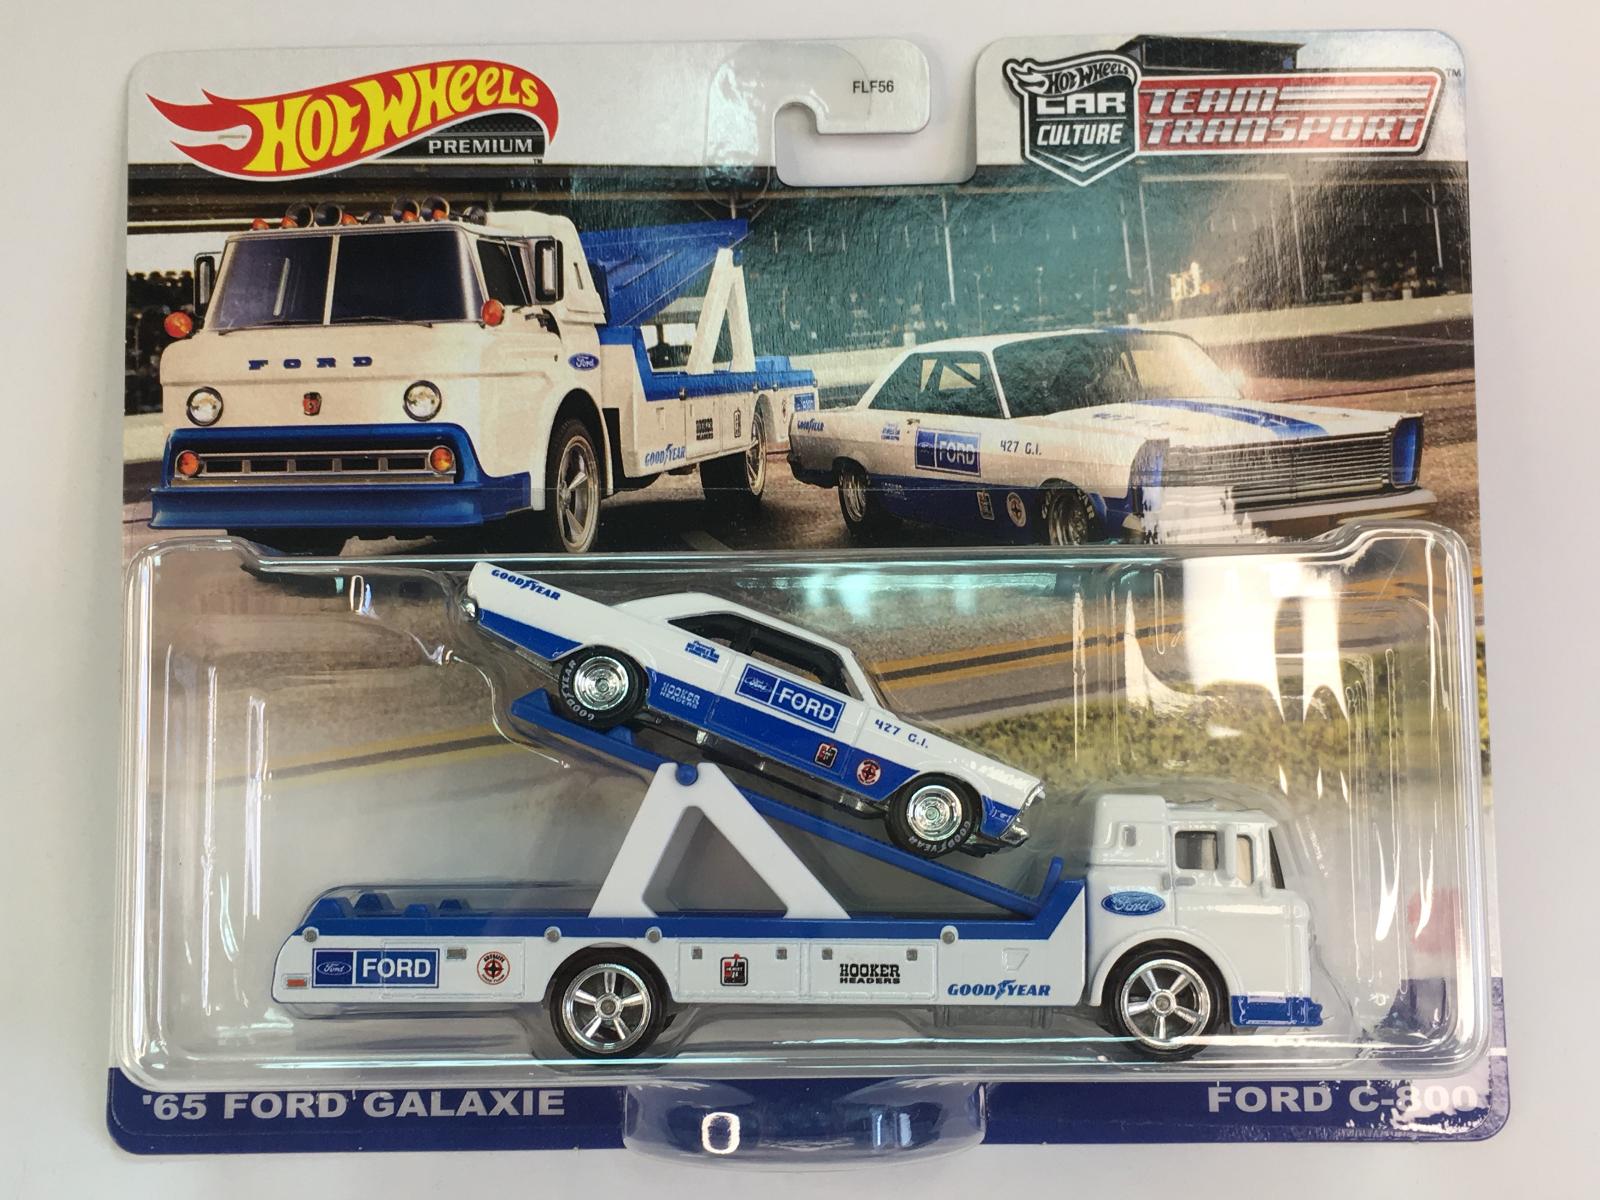 '65 Ford Galaxia + Ford C-800 - Hot Wheels Team Transport #38 - Zberateľské modely áut